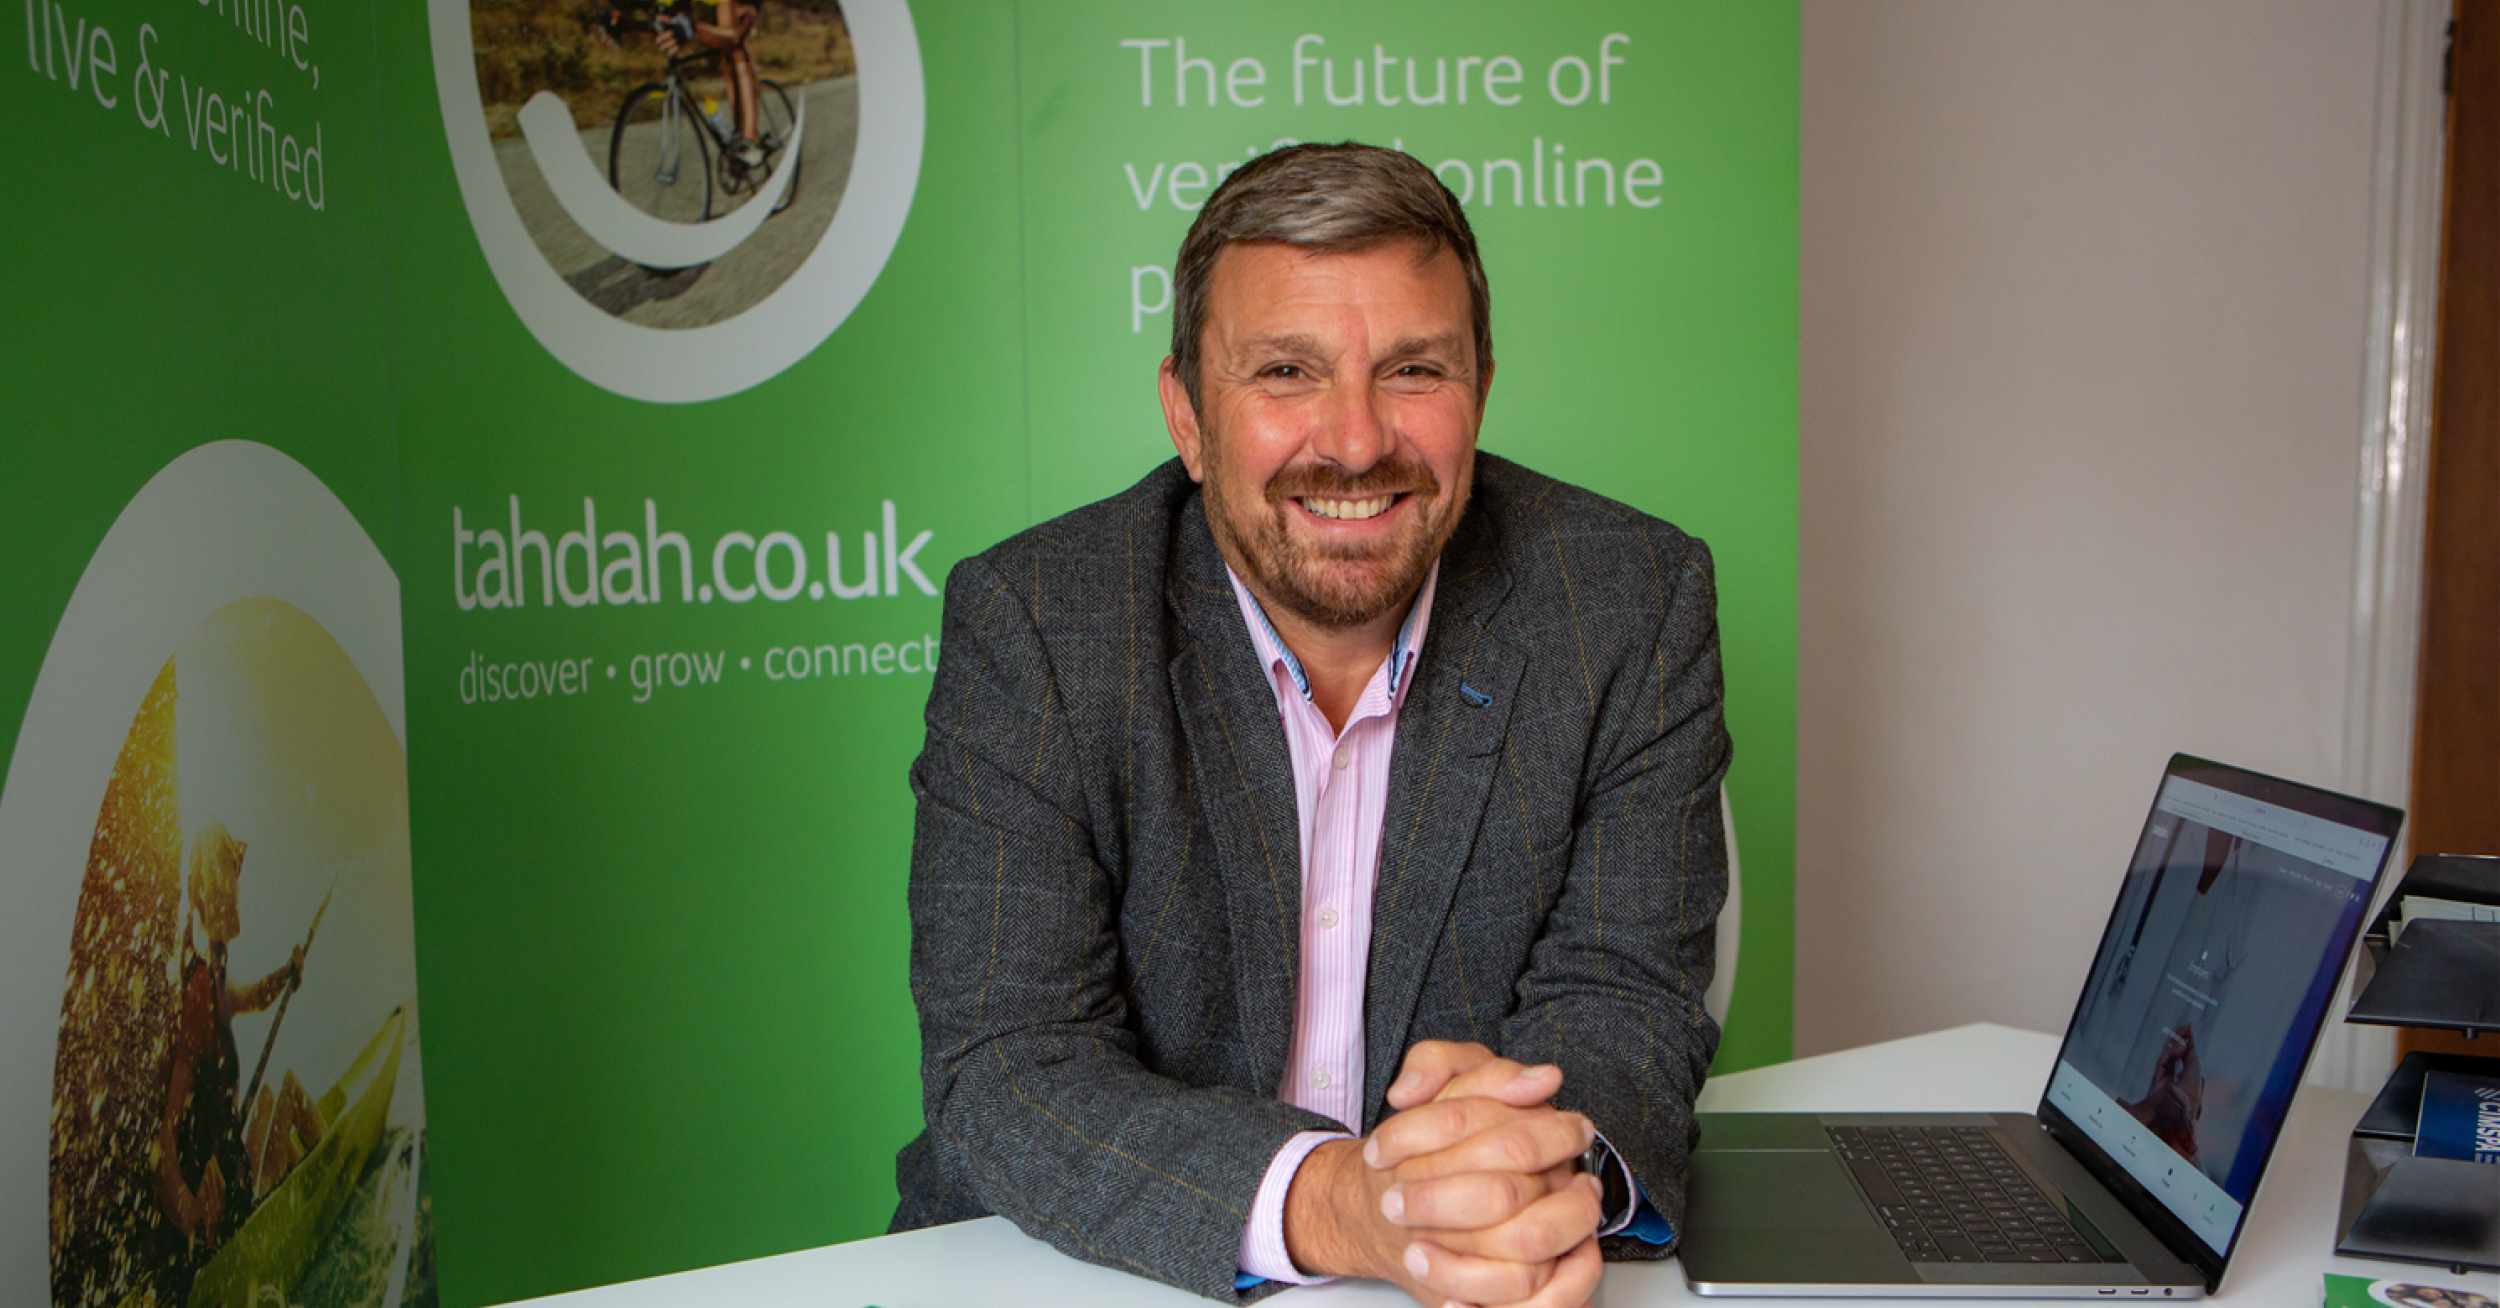 Tahdah Secure £1m Investment to Scale